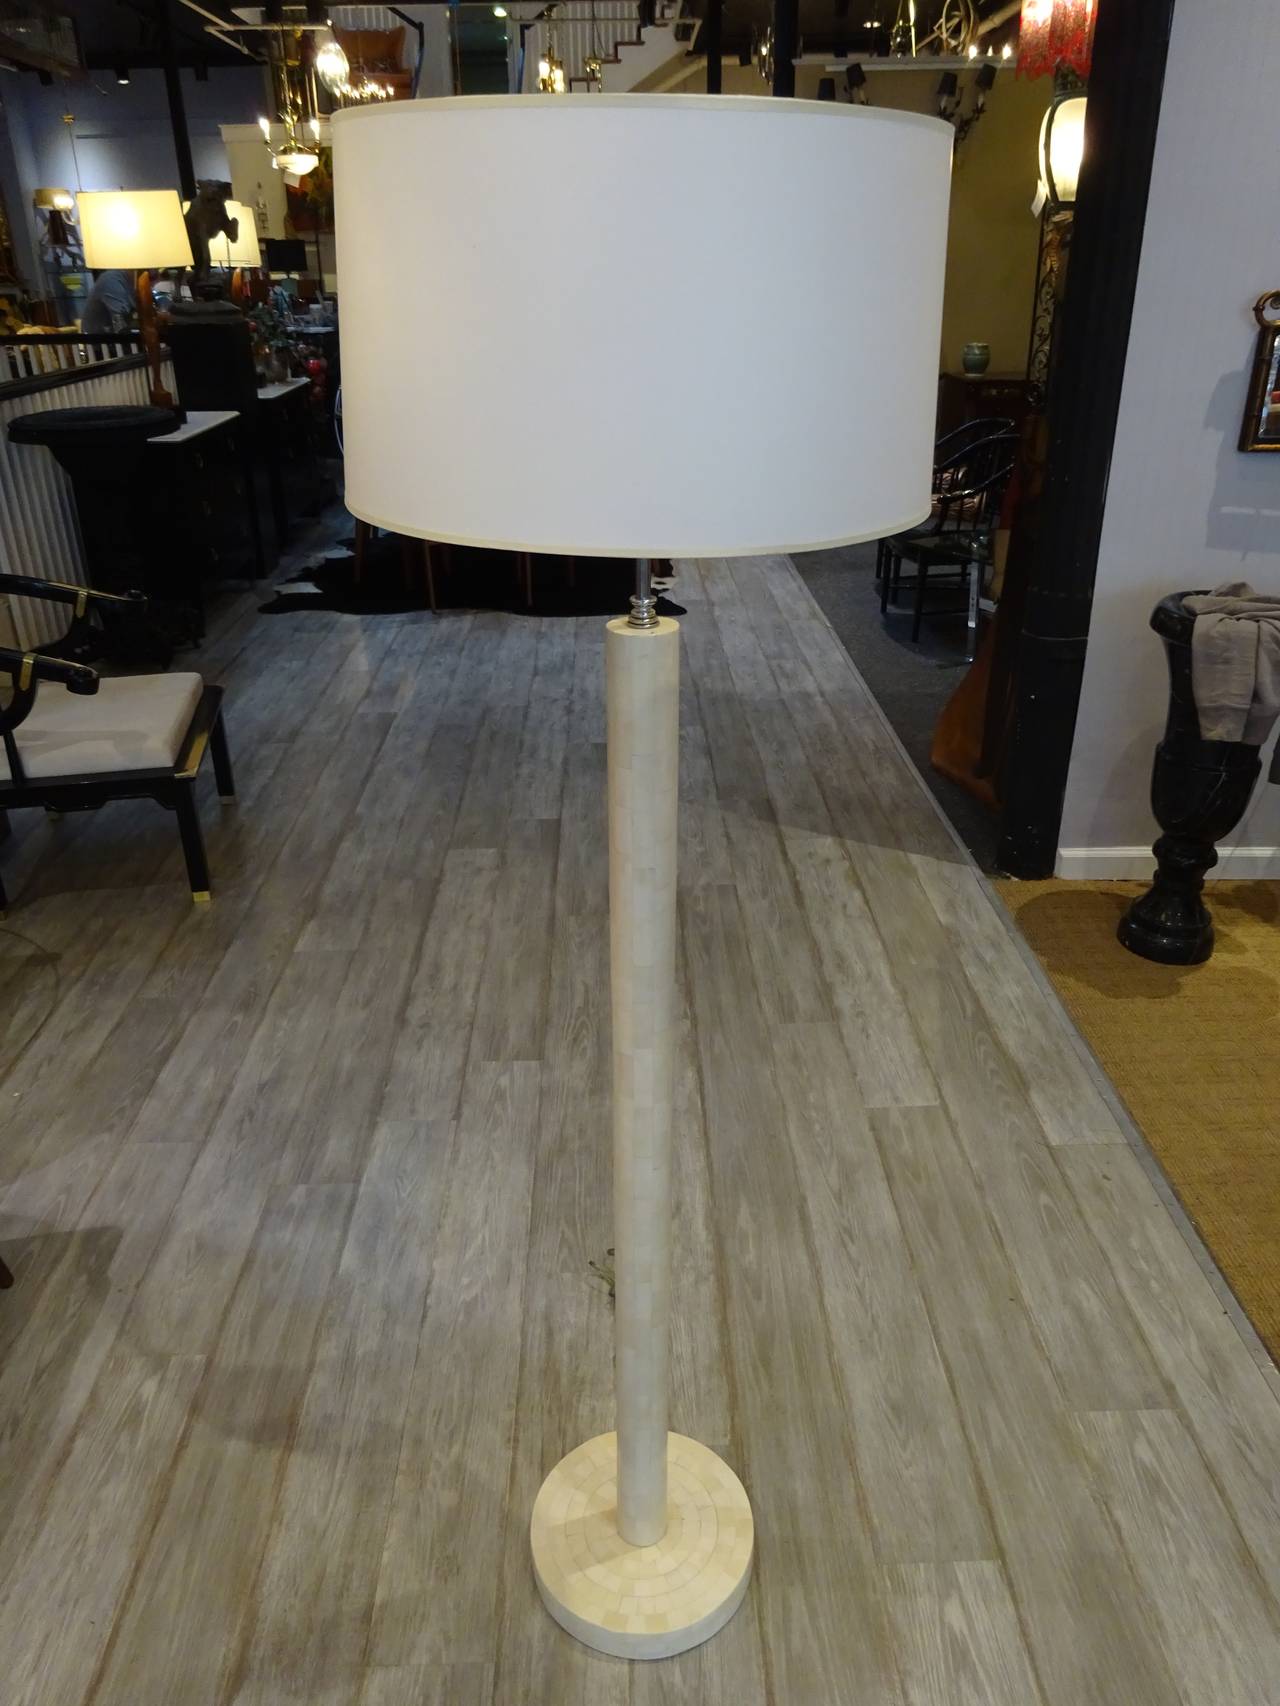 Mosaic Bone Floor Lamp, shade not included, display only.